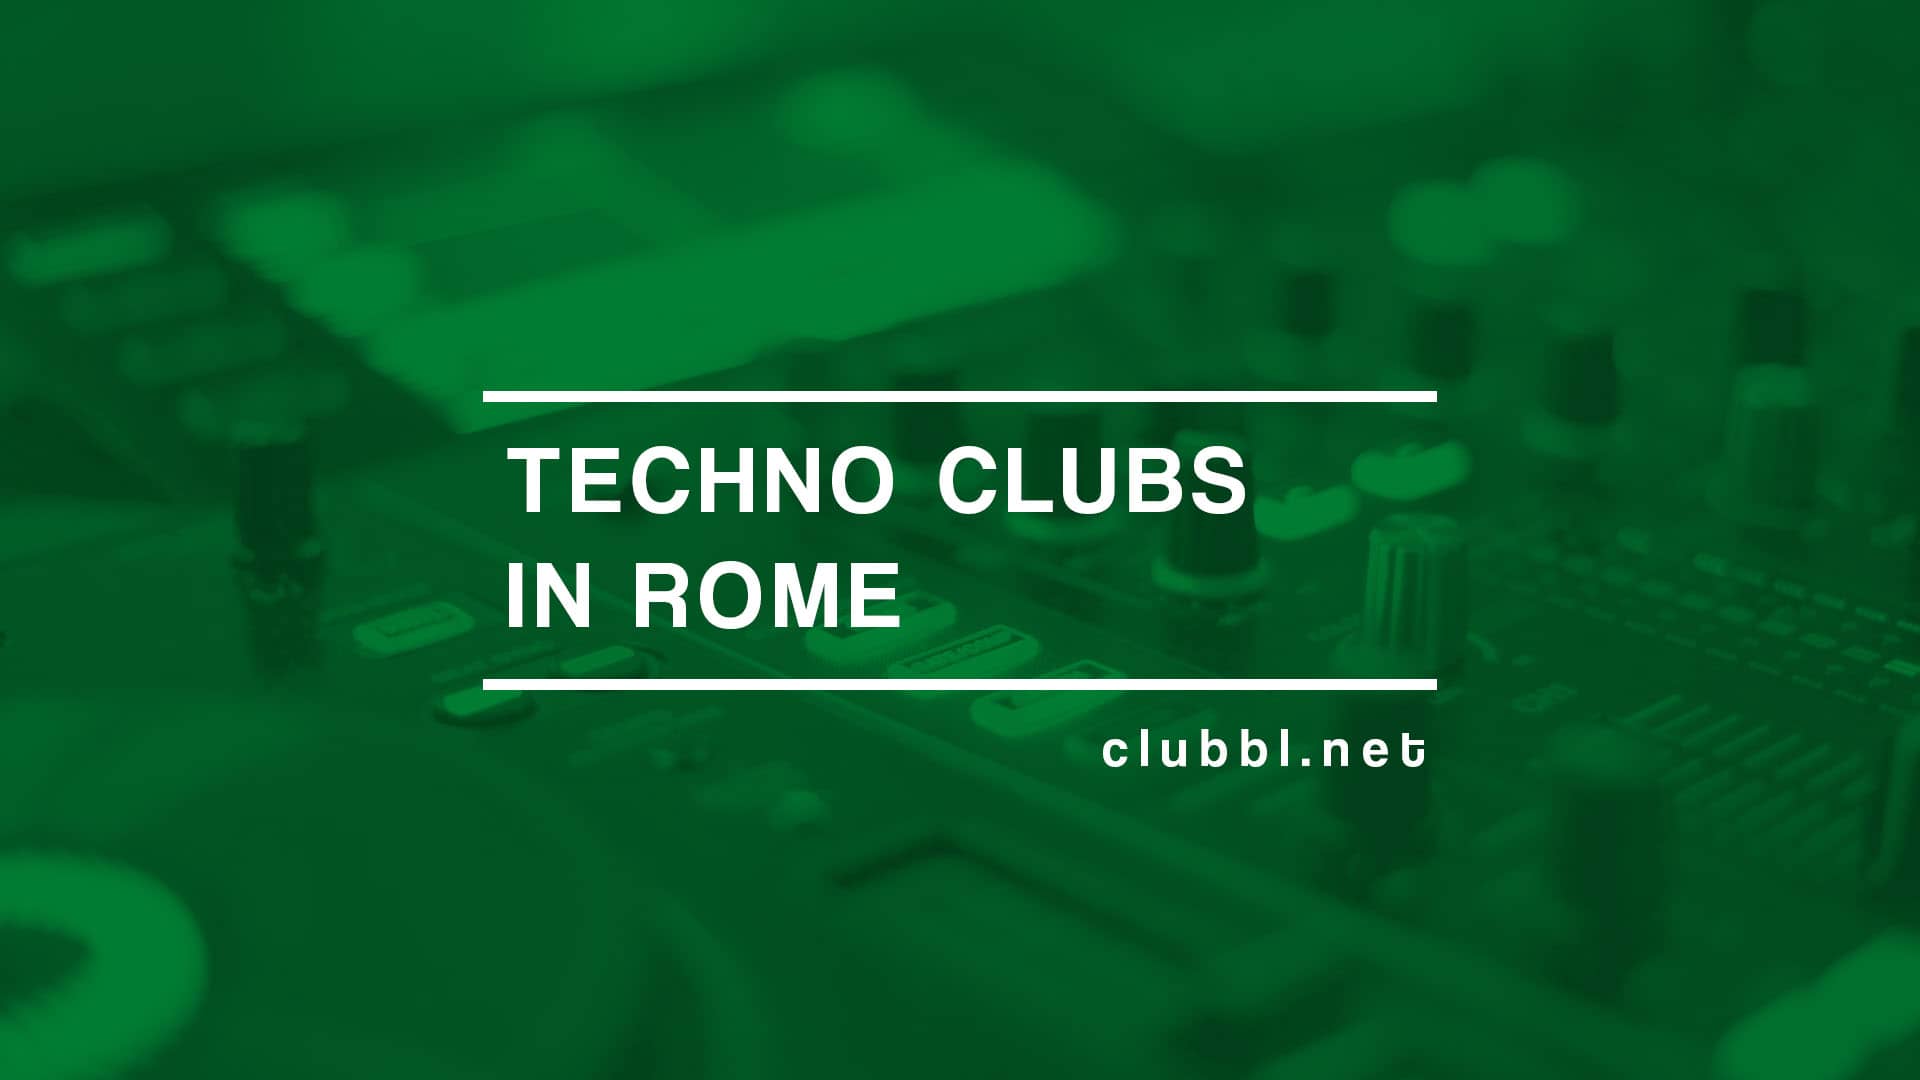 Techno clubs in Rome - Discover the list of techno venues in the city.